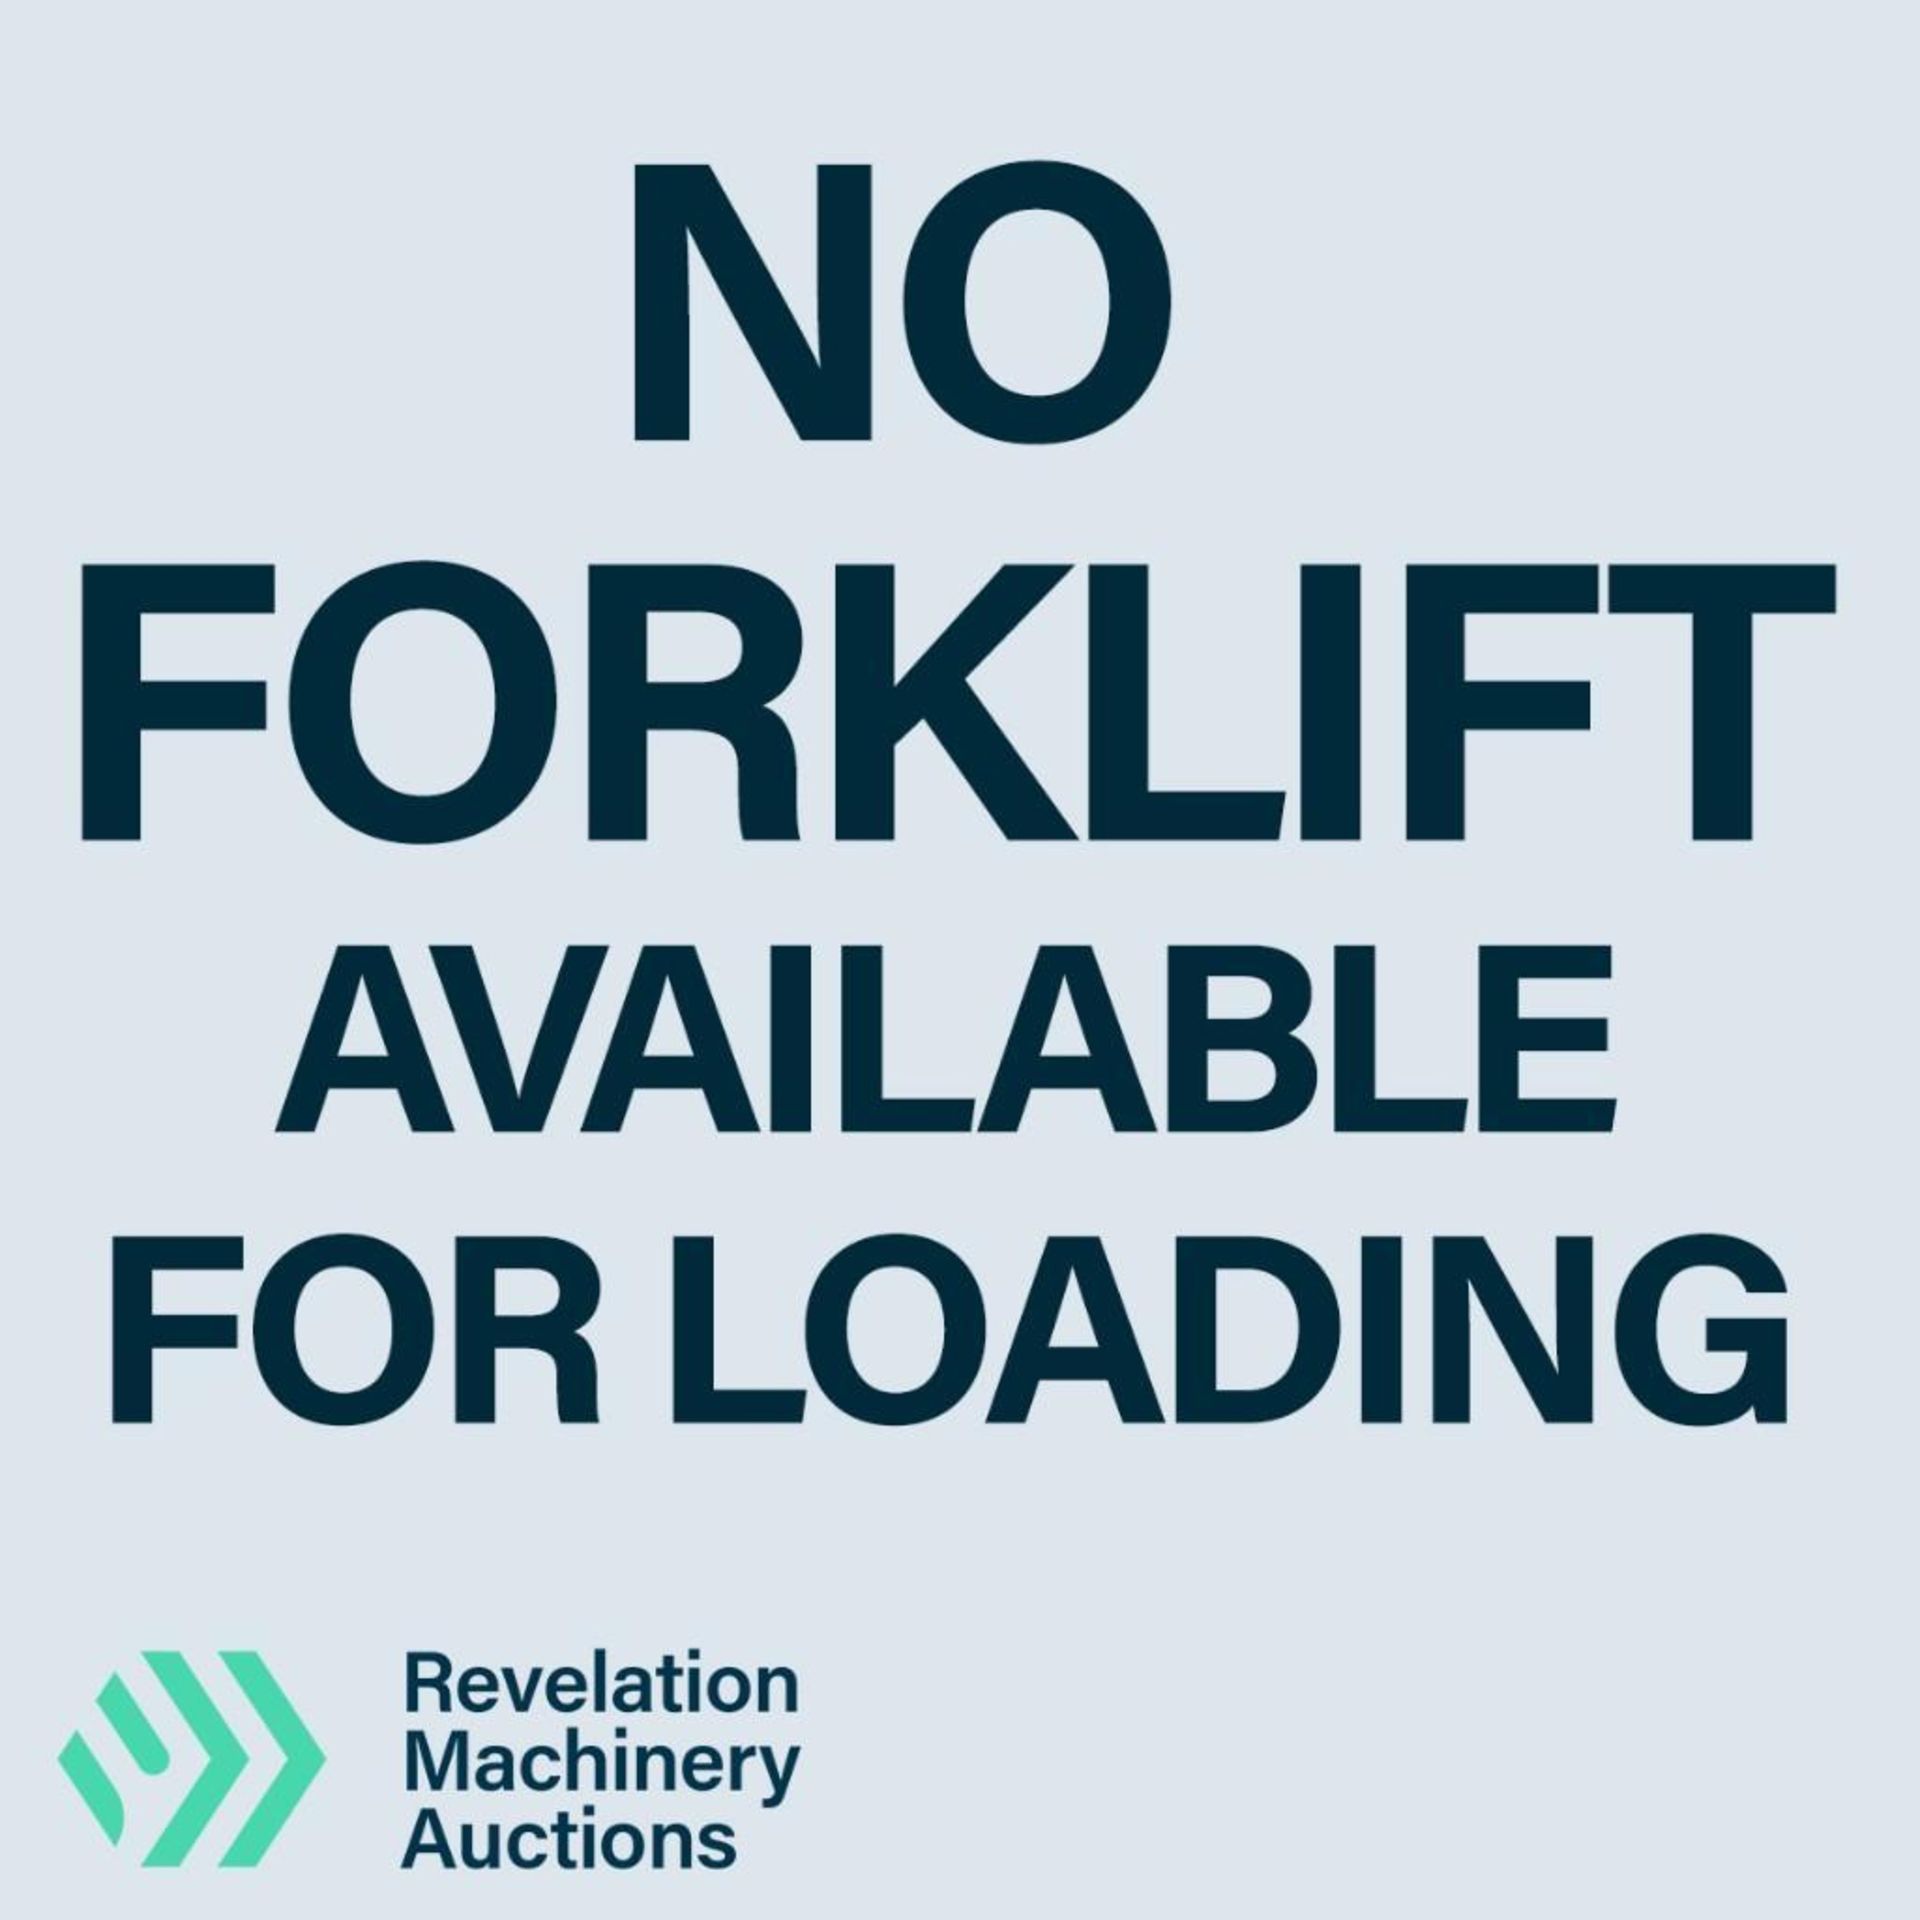 NO FORKLIFT AVAILABLE FOR LOADING